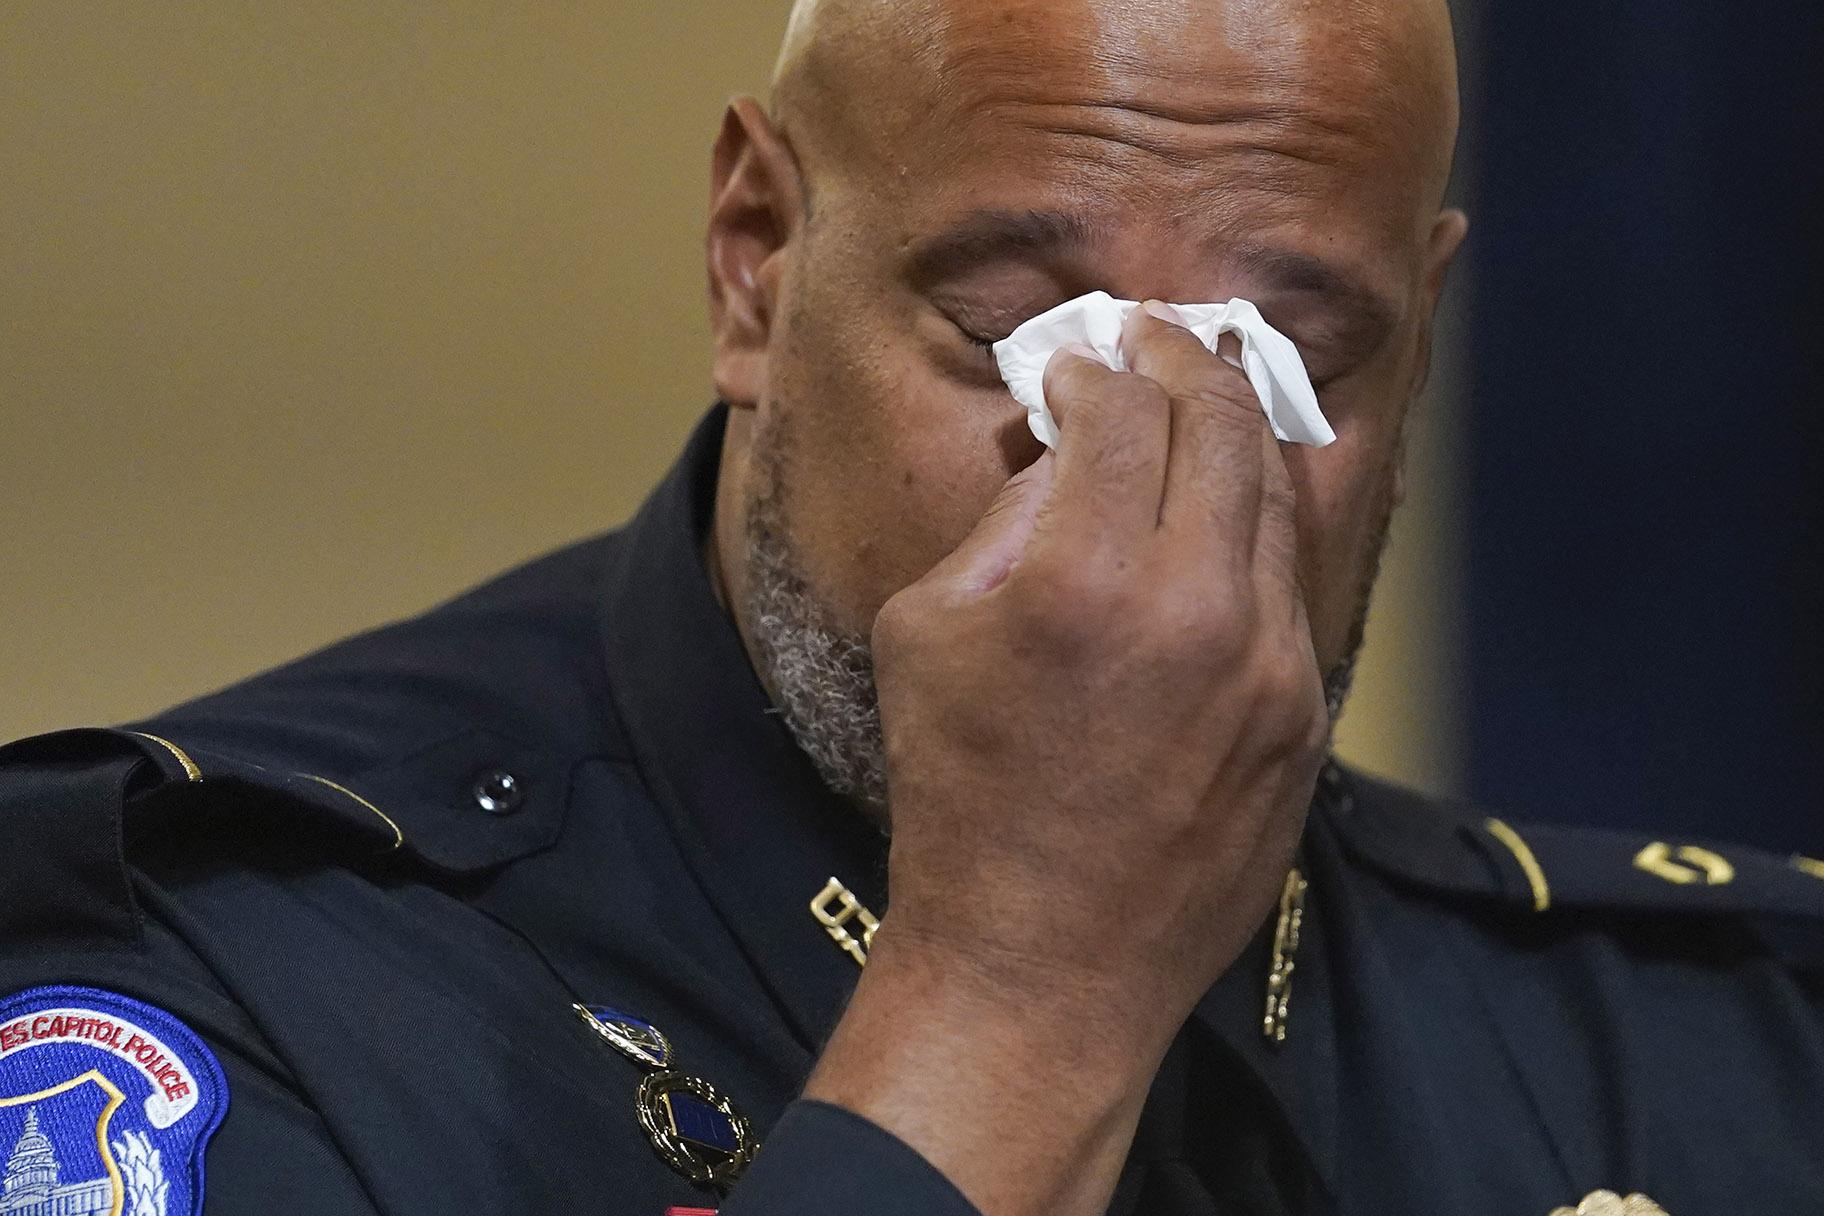 Washington Metropolitan Police Department officer Daniel Hodges wipes his eyes during the House select committee hearing on the Jan. 6 attack on Capitol Hill in Washington, Tuesday, July 27, 2021. (AP Photo / Andrew Harnik, Pool)